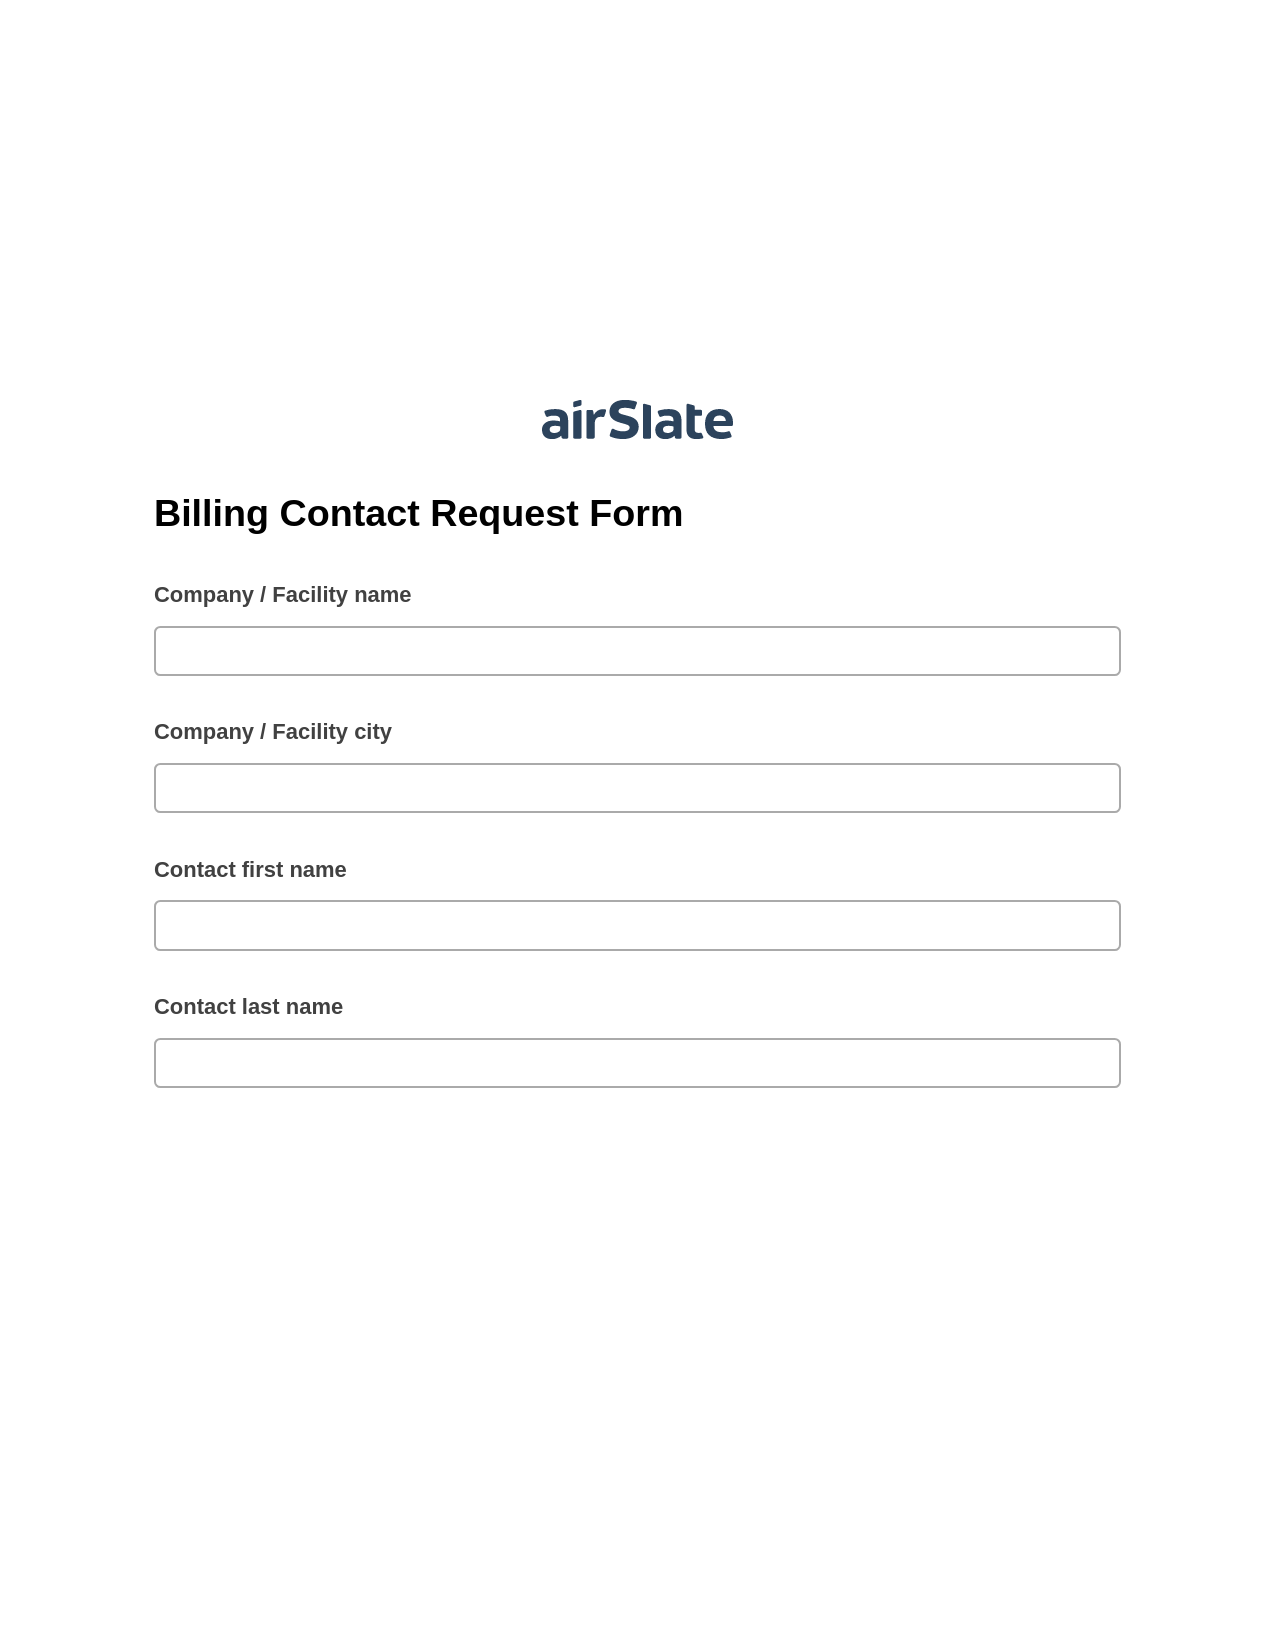 Billing Contact Request Form Pre-fill Slate from MS Dynamics 365 Records Bot, System Bot - Create a Slate in another Flow, Box Bot